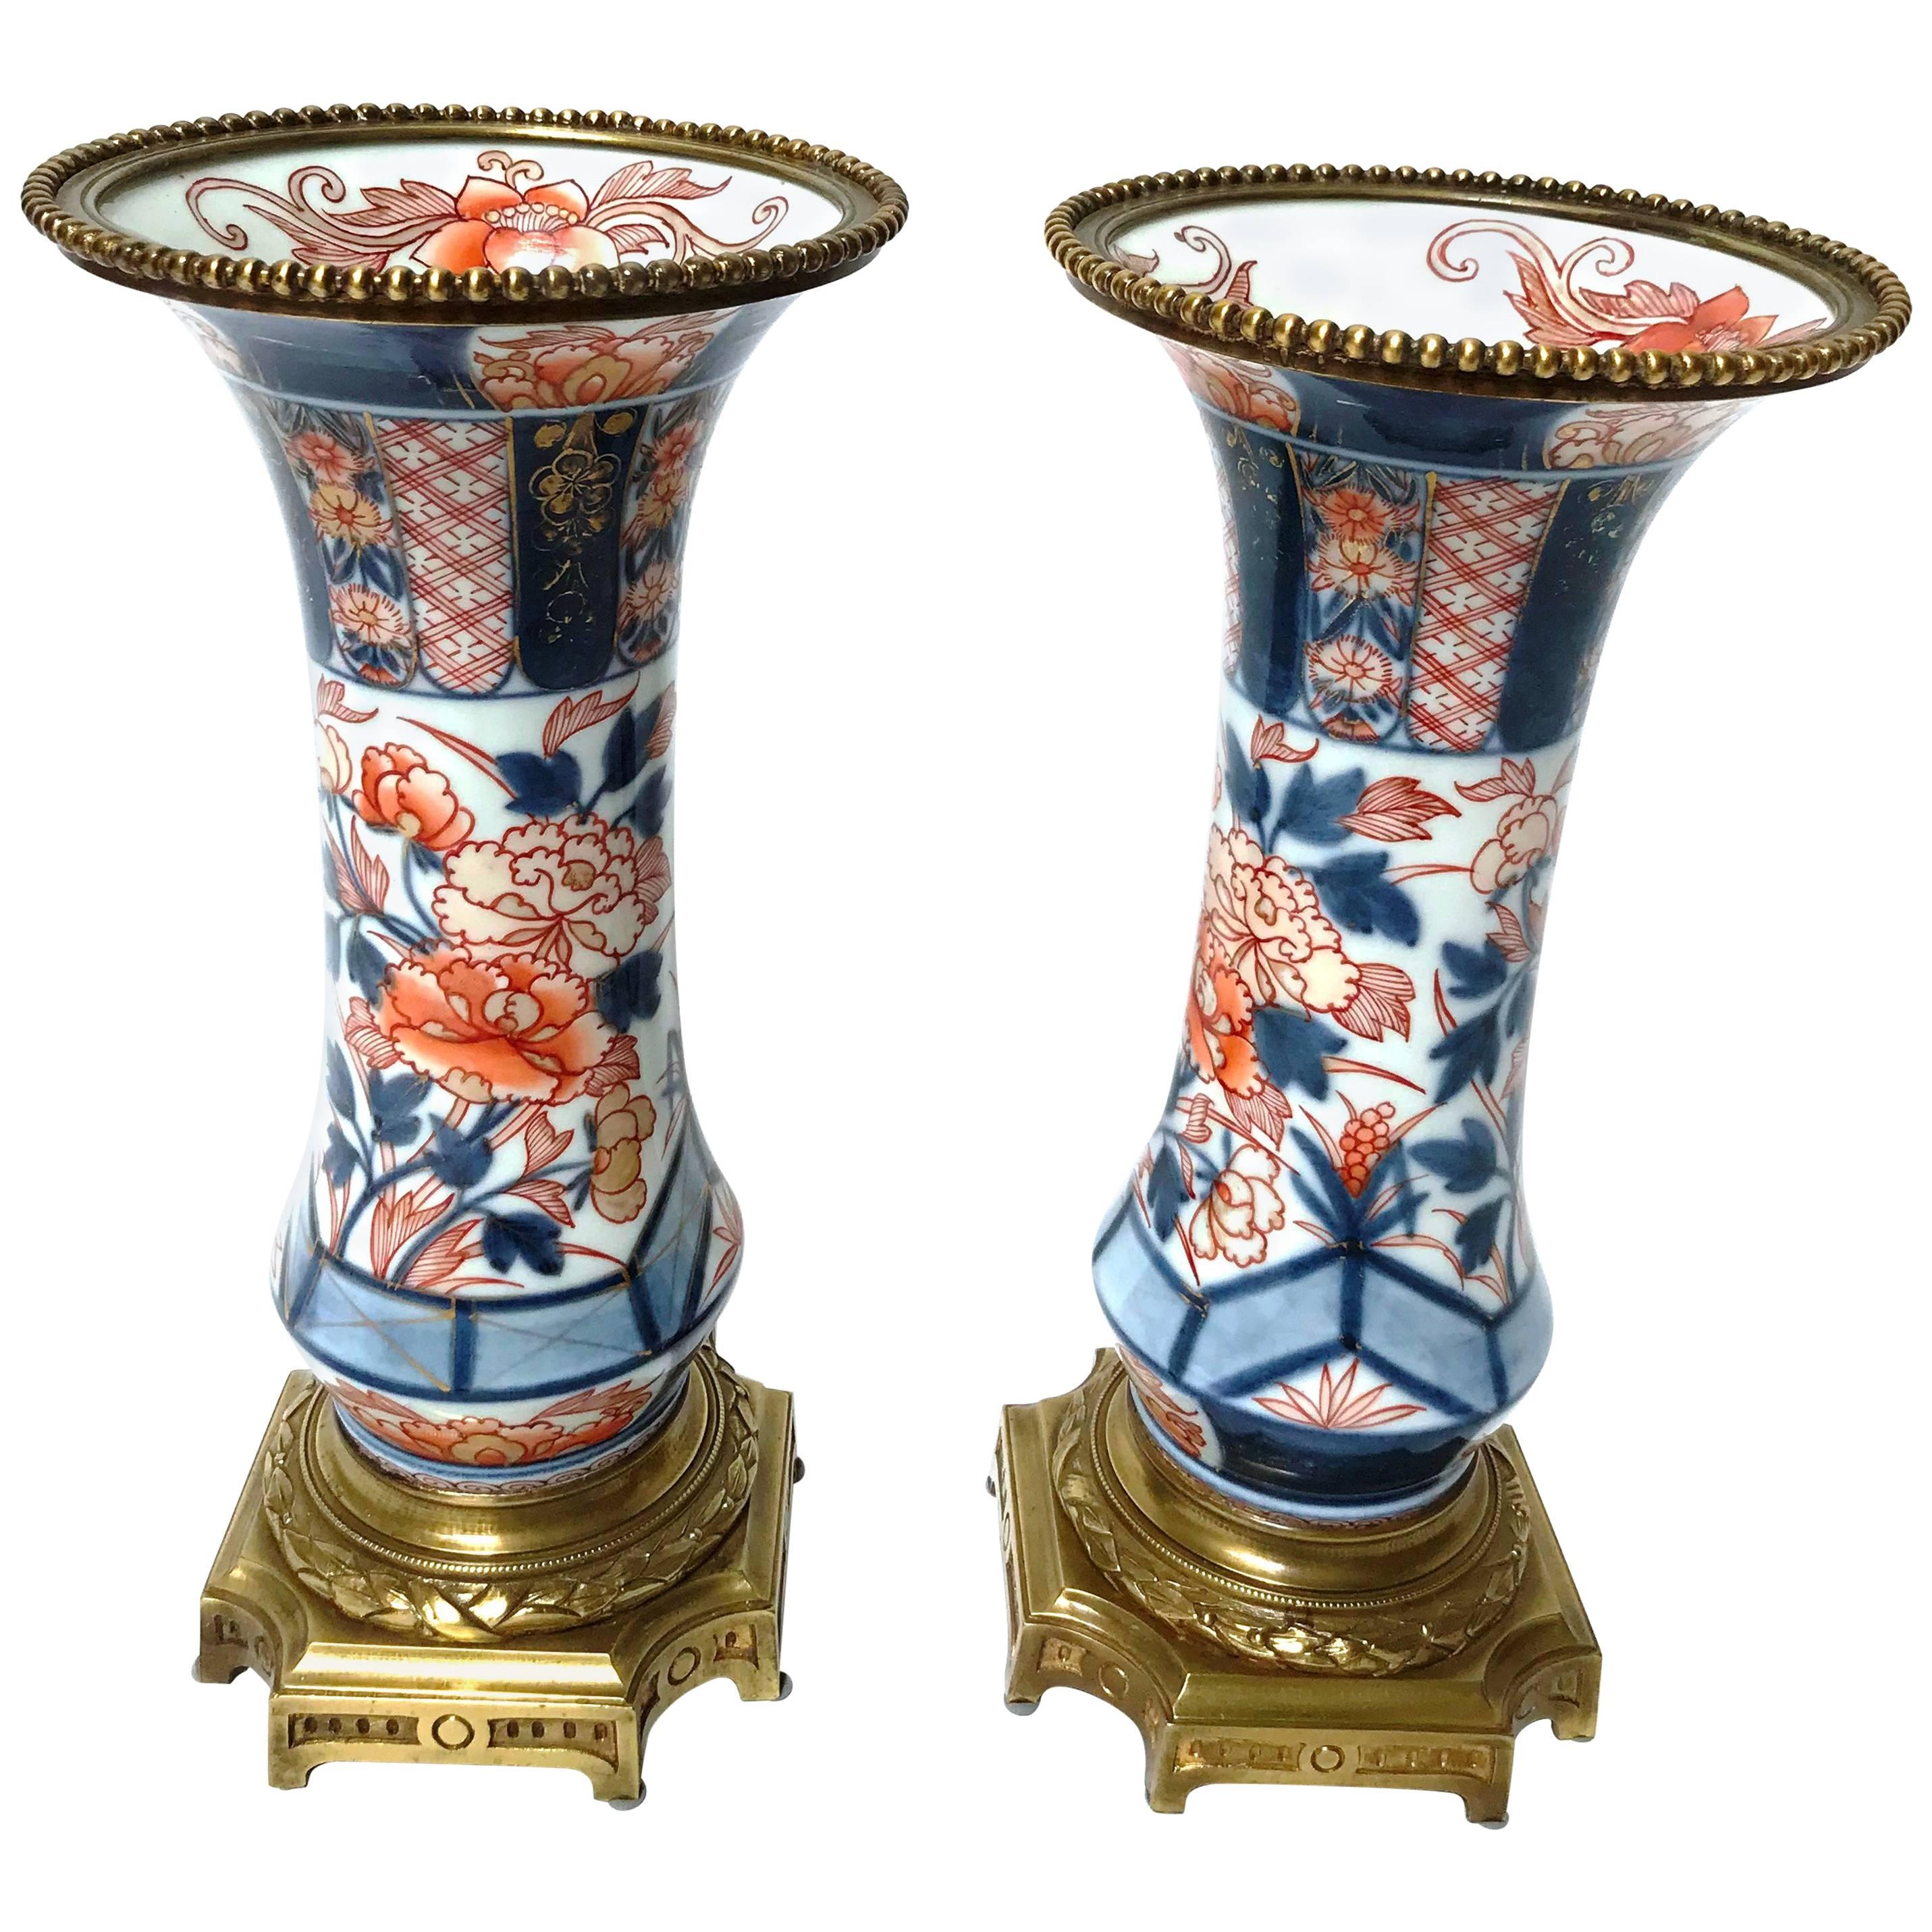 Pair of Early 19th Century Ormolu Mounted Japanese Imari Porcelain Vases For Sale